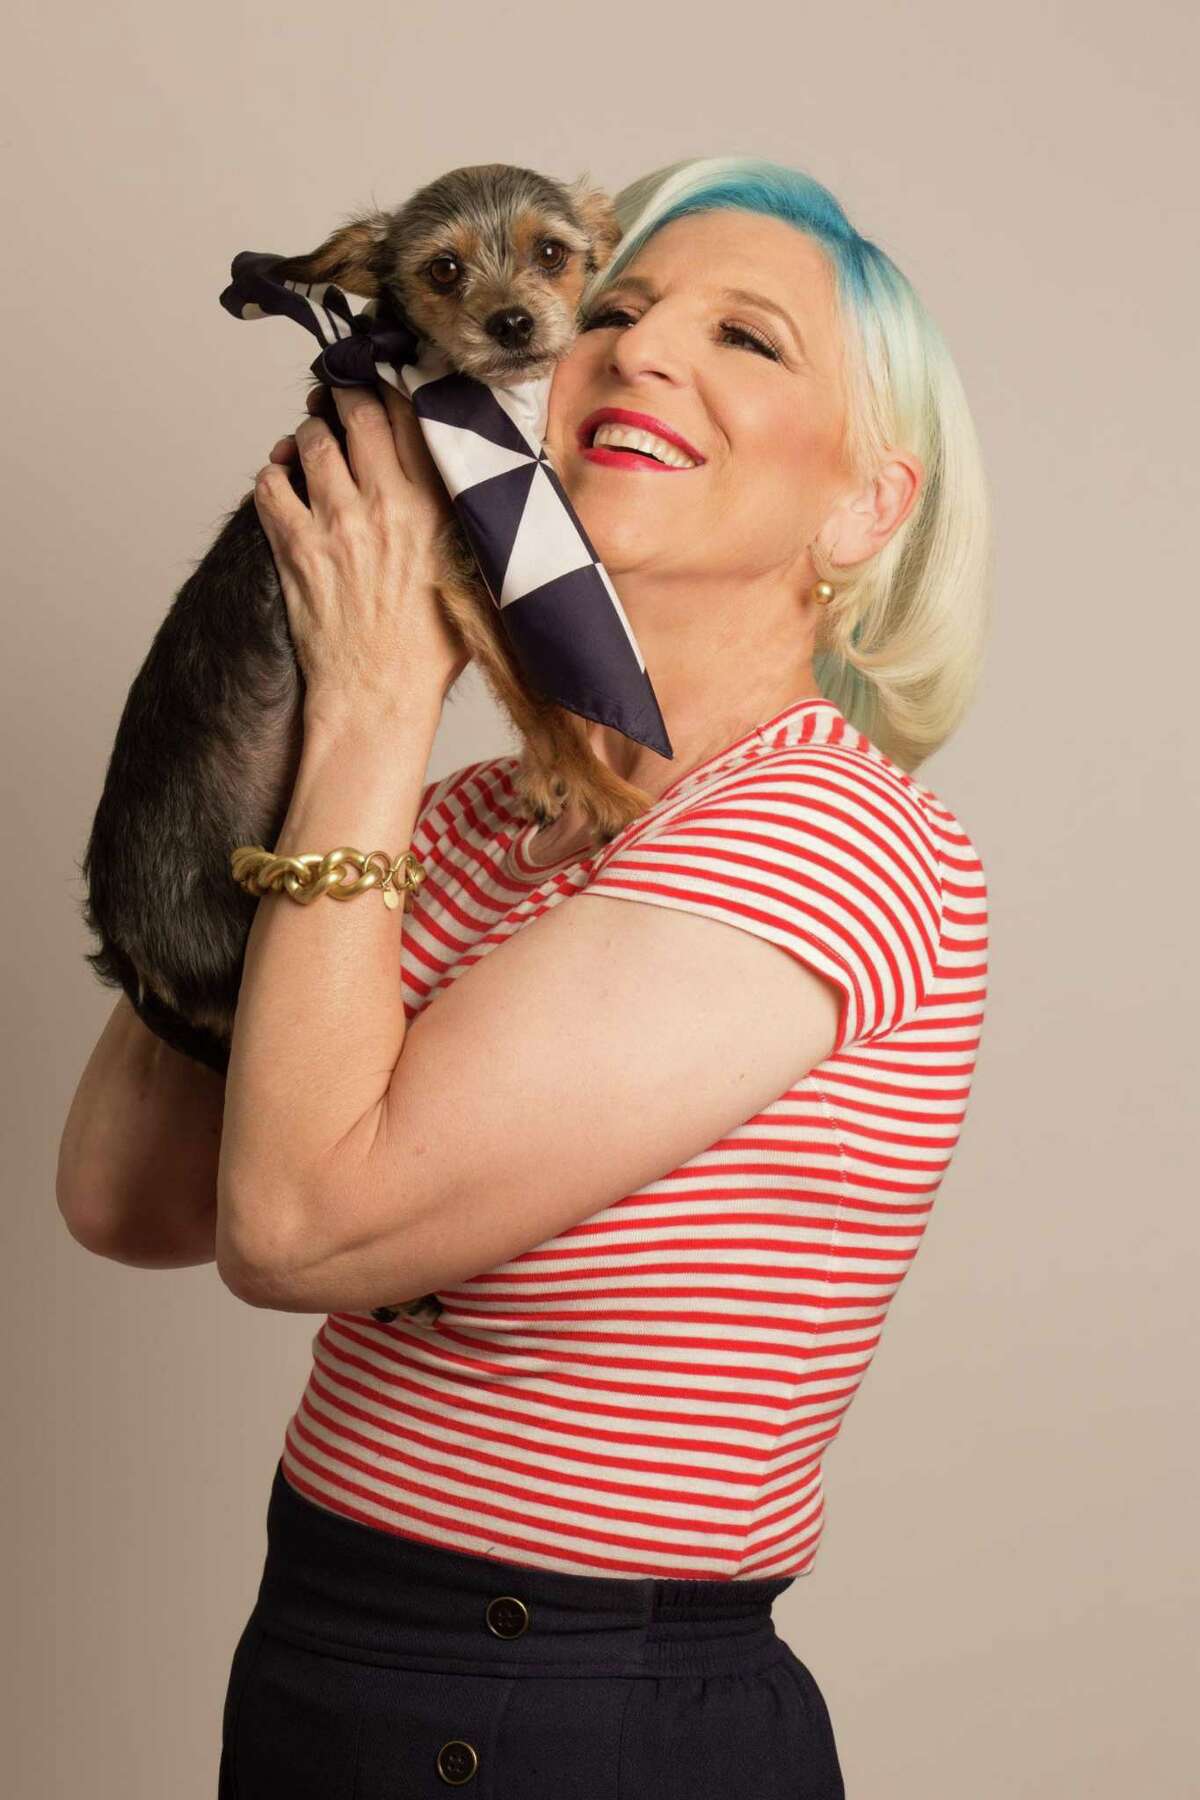 Lisa Lampanelli will perform her show “Sit Down & Shut Up” on April 24 at 8 p.m. at the Fairfield Theatre Company.